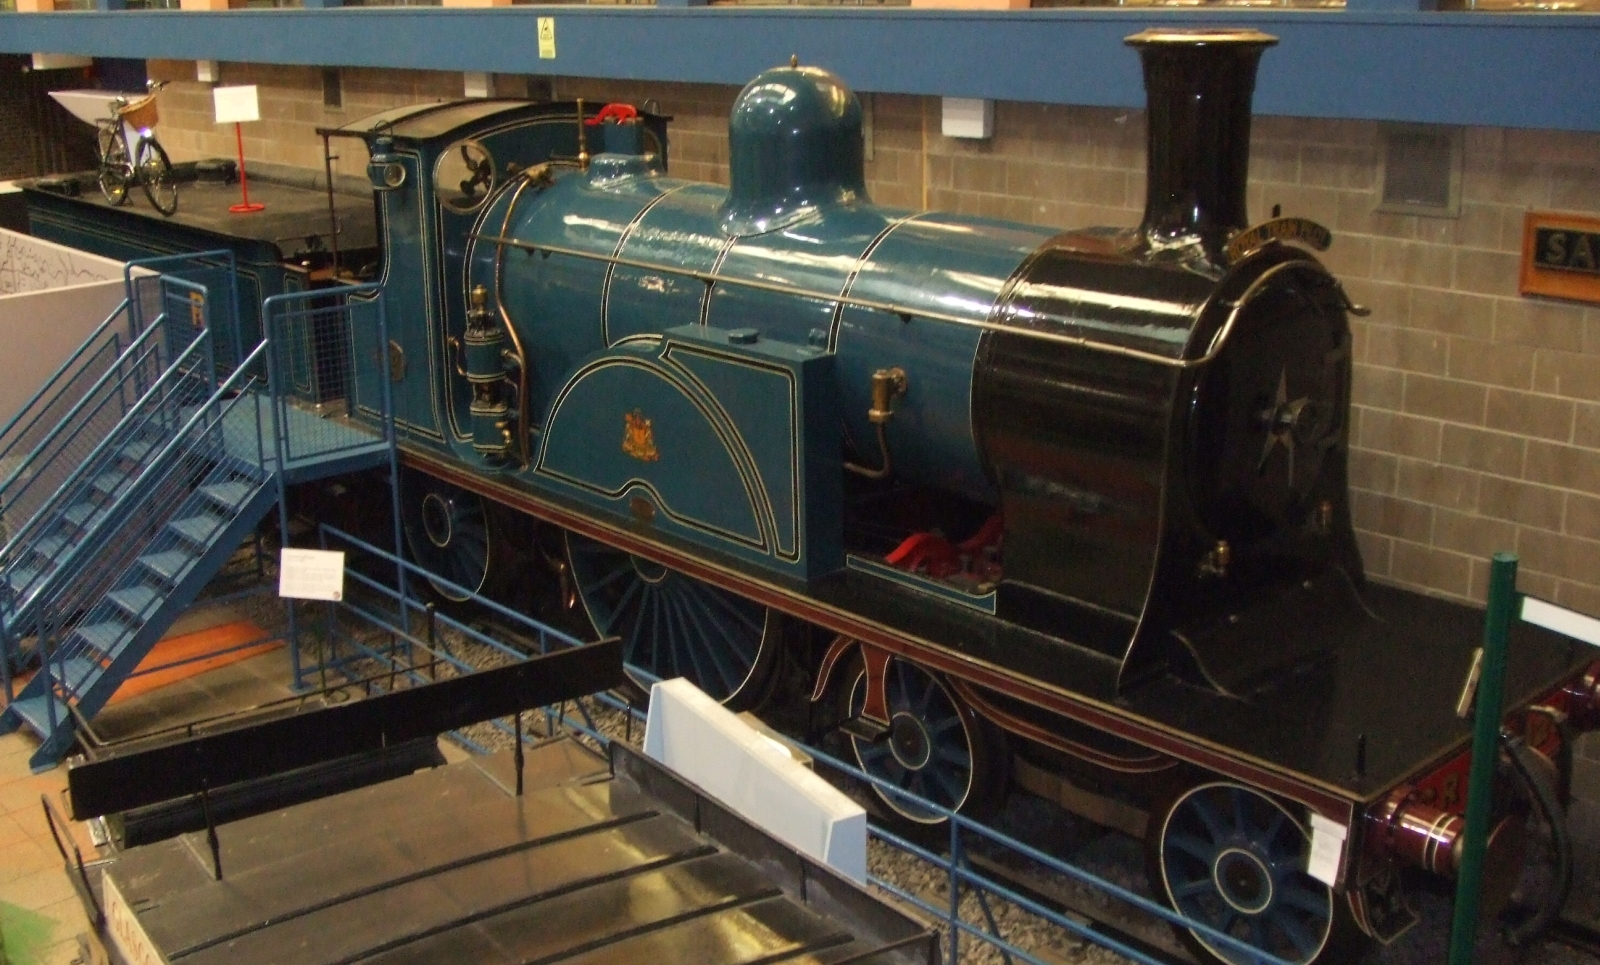 No. 123 in the Glasgow Transportation Museum